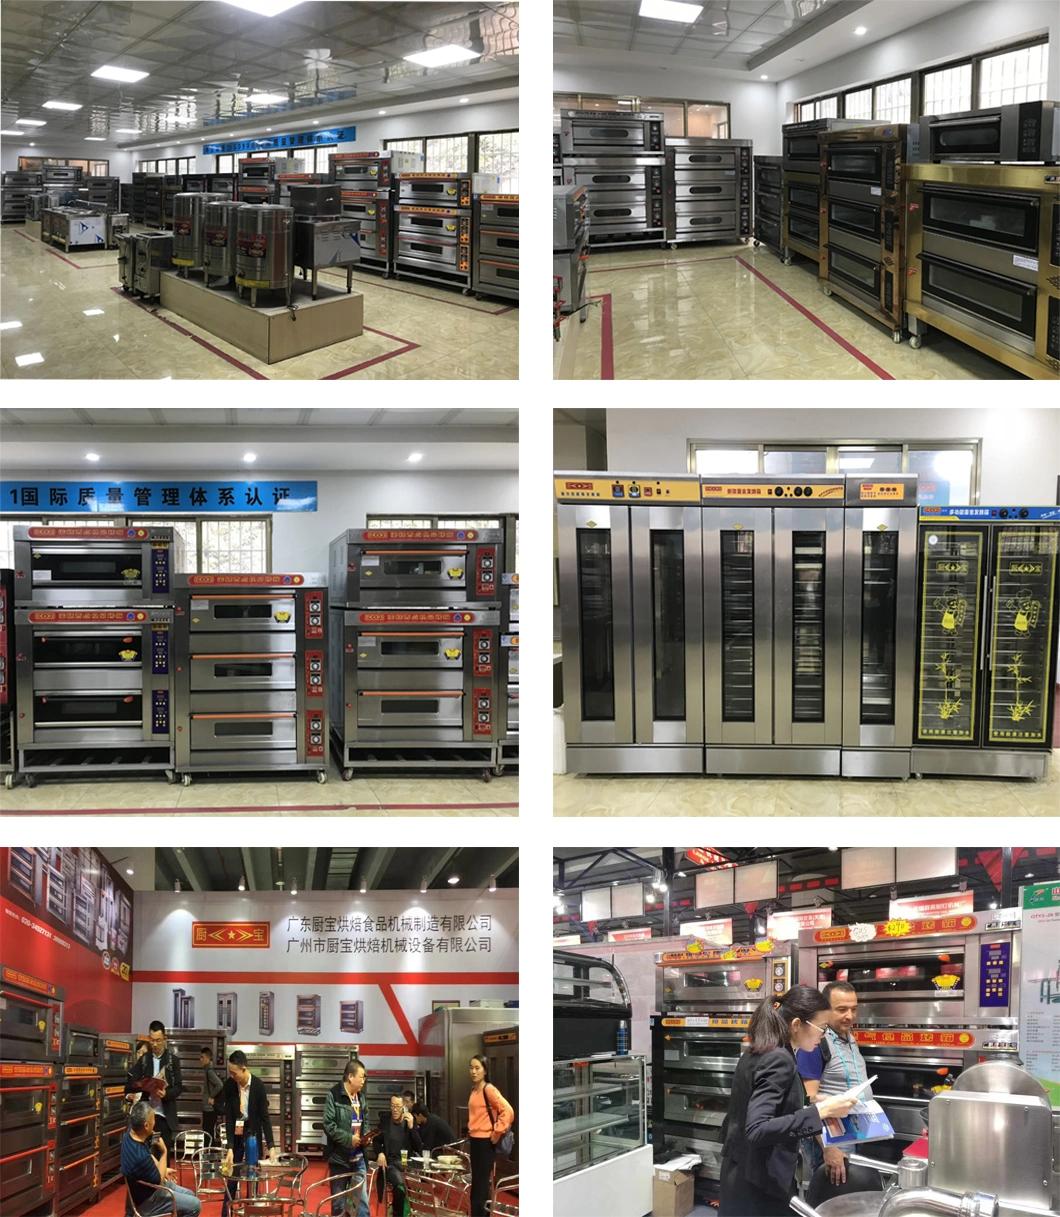 1 Deck 2 Trays Luxury Electric Oven for Commercial Kitchen Baking Equipment Food Machinery Bakery Machine with Computer Controller Oven